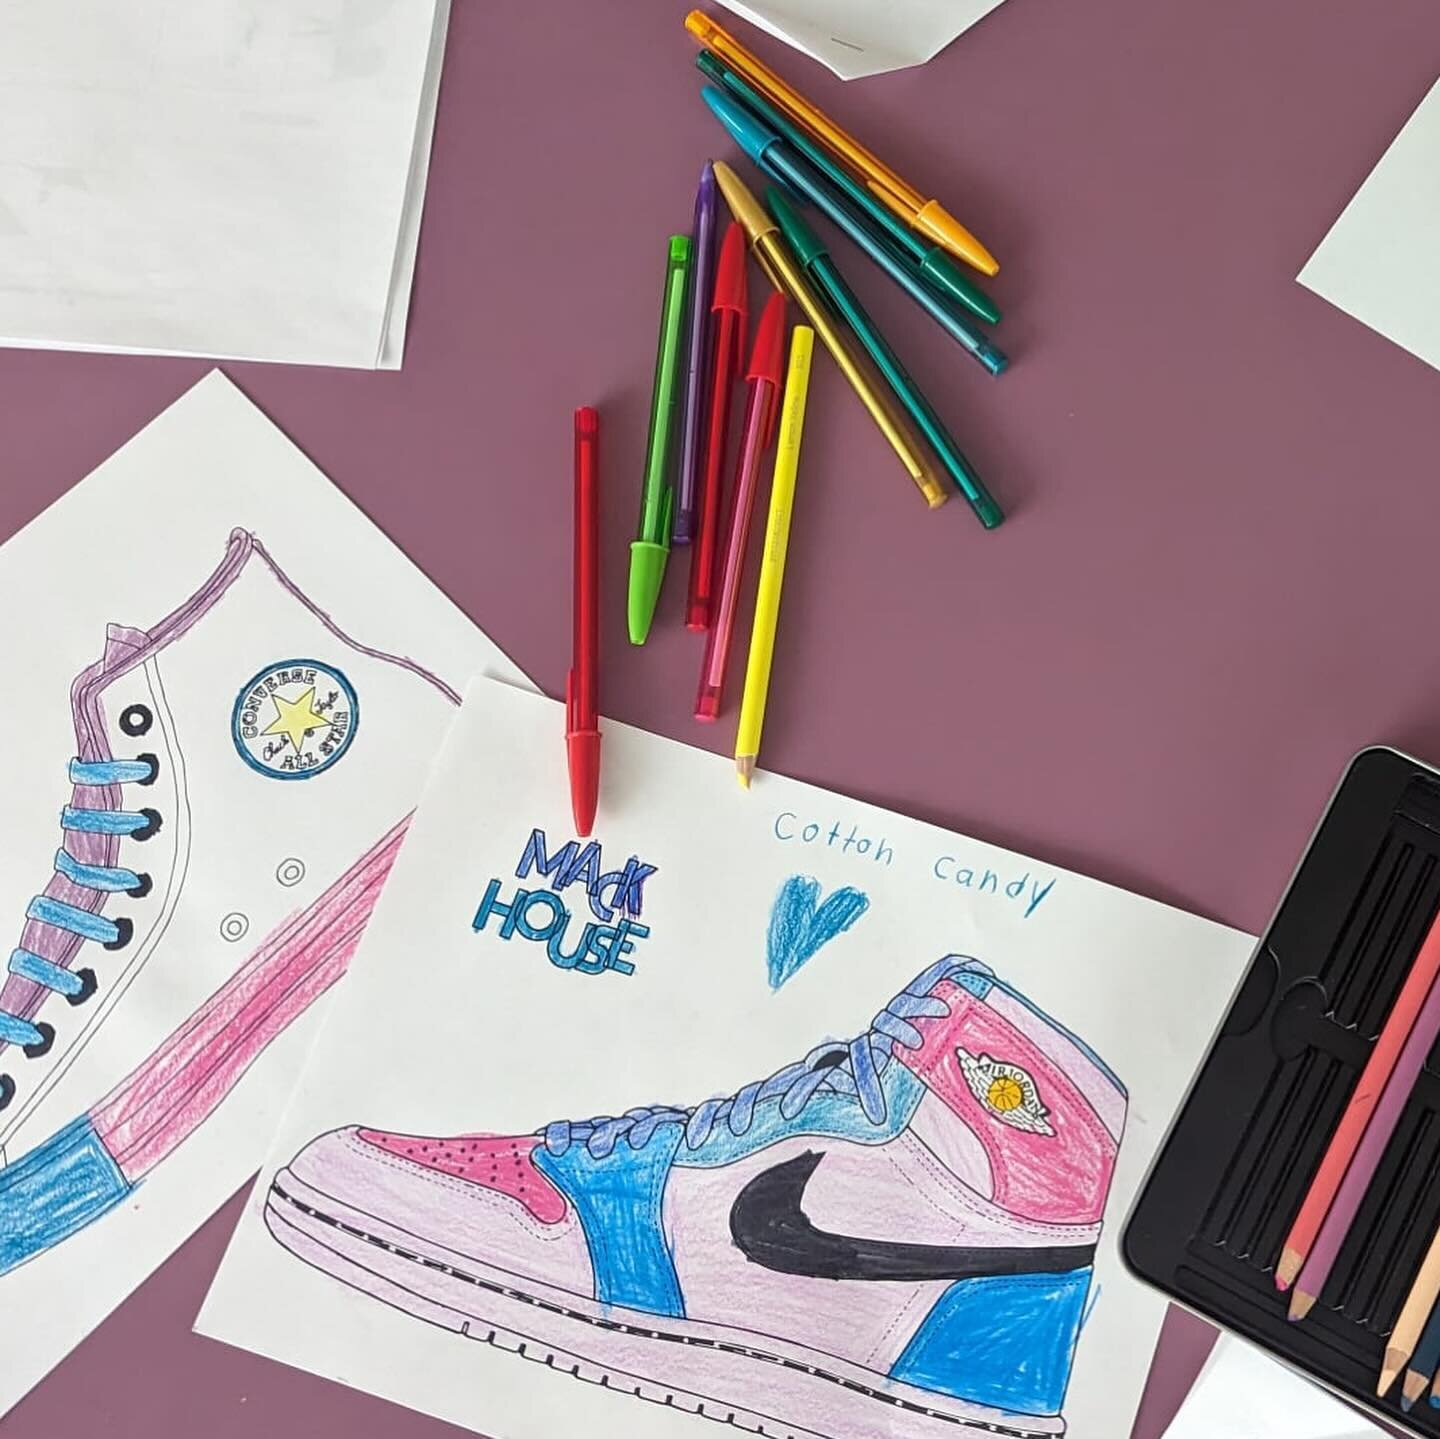 Mack House visits @layup_basketball 🎨 🏀 

Mack techs visited Lay-Up Basketball to talk about sneaker designs. Kiddies within the Lay-Up community were able to design their own sneakers!

Swipe through to see designs😊